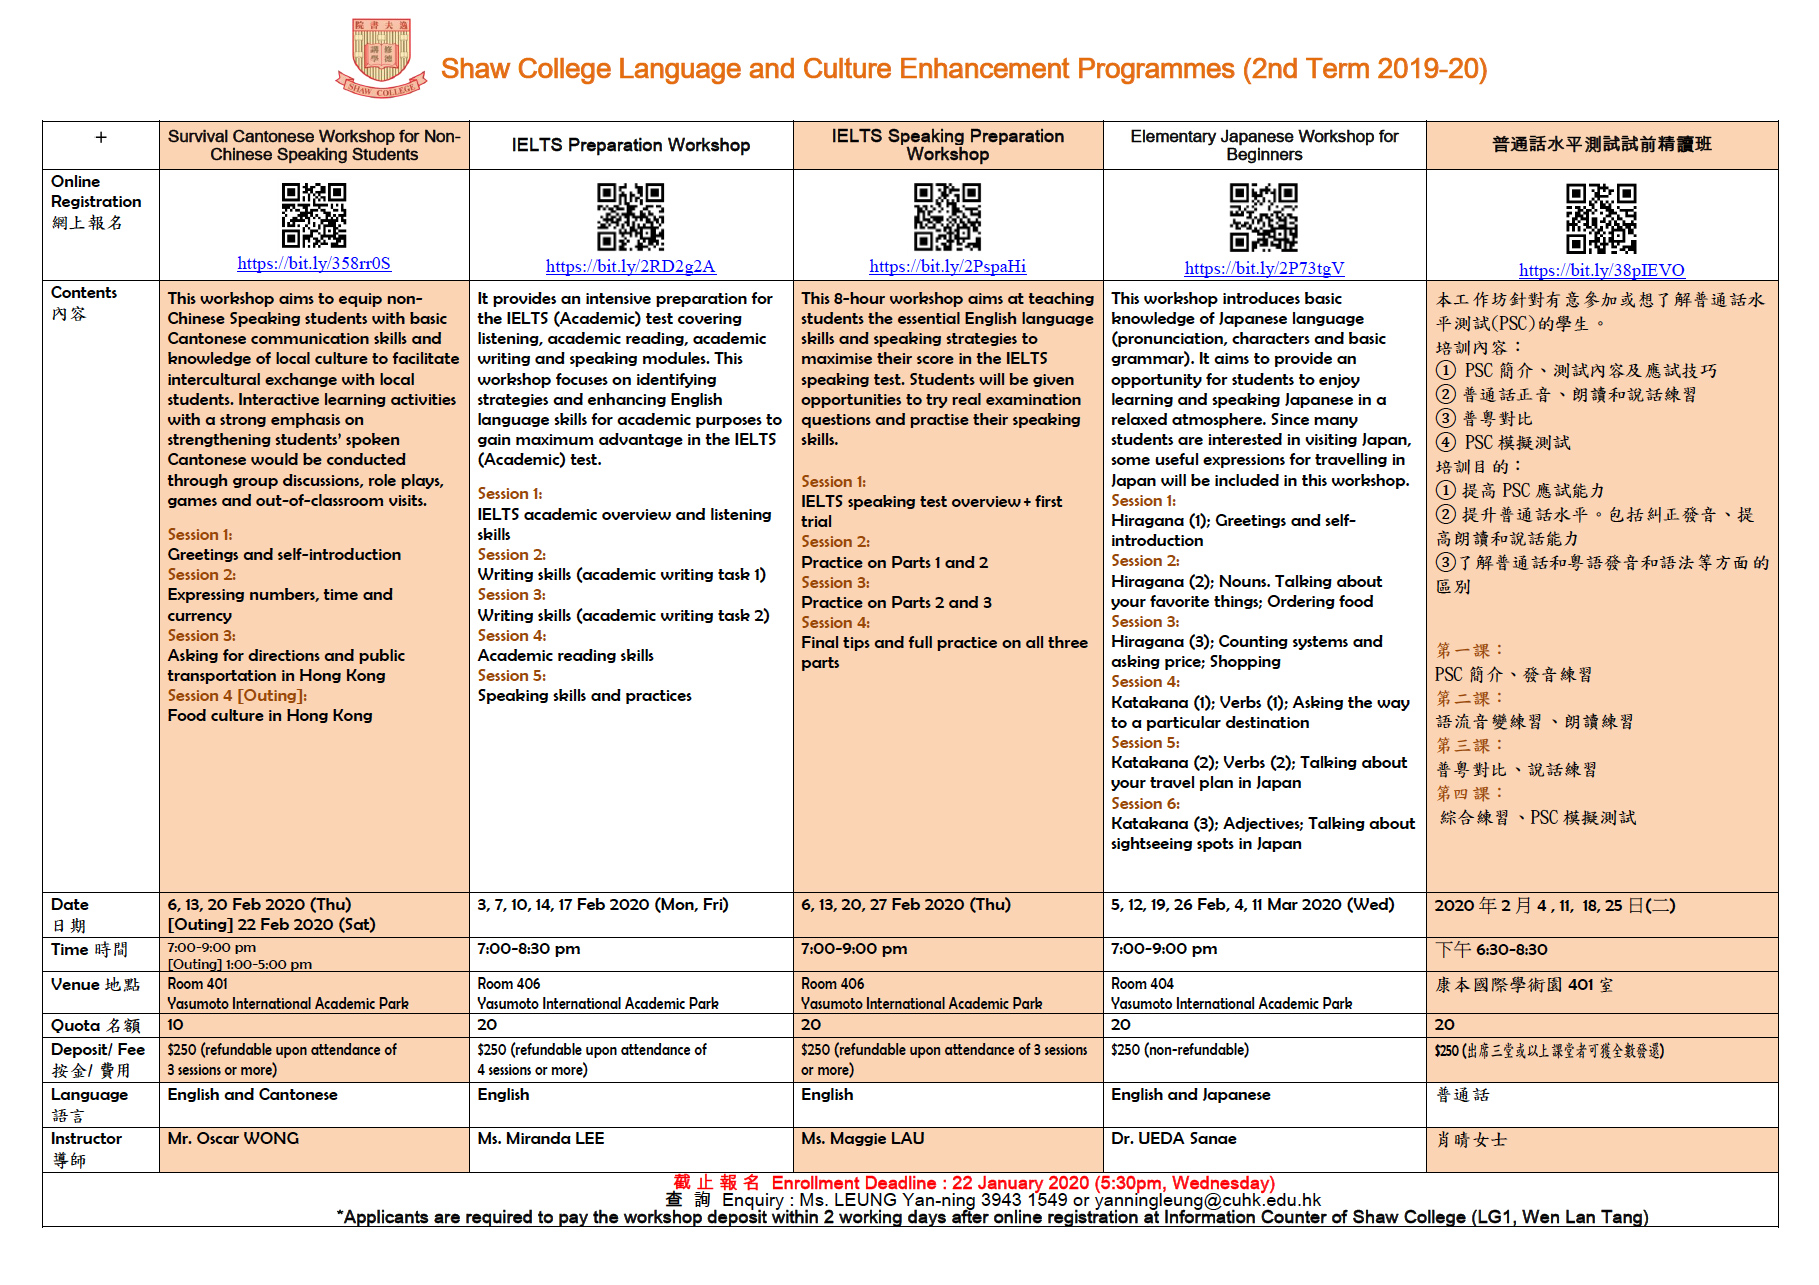 Shaw College Language and Culture Enhancement Programme (2019-20 2nd Term)